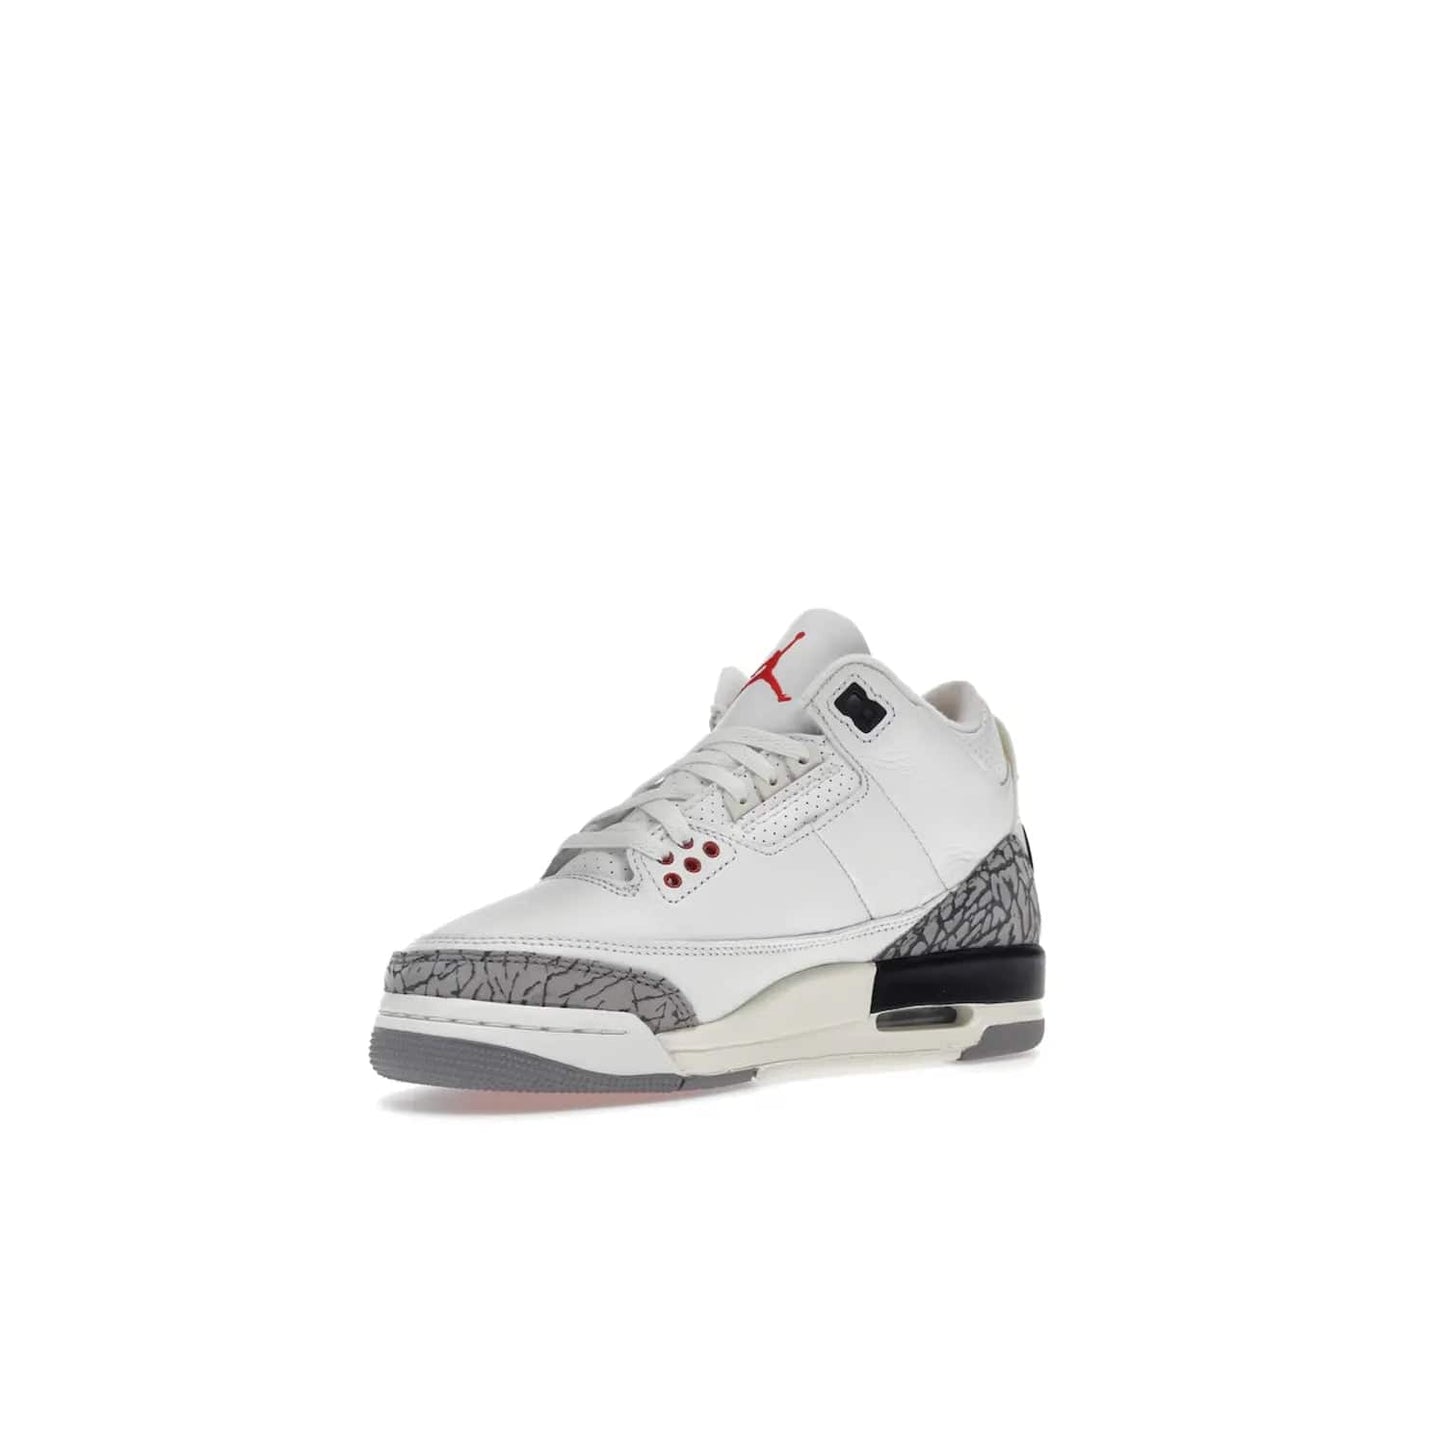 Jordan 3 Retro White Cement Reimagined (GS) - Image 15 - Only at www.BallersClubKickz.com - Grab the perfect blend of modern design and classic style with the Jordan 3 Retro White Cement Reimagined (GS). Features Summit White, Fire Red, Black, and Cement Grey colorway, iconic Jordan logo embroidered on the tongue, and “Nike Air” branding. Limited availability, get your pair before March 11th 2023.